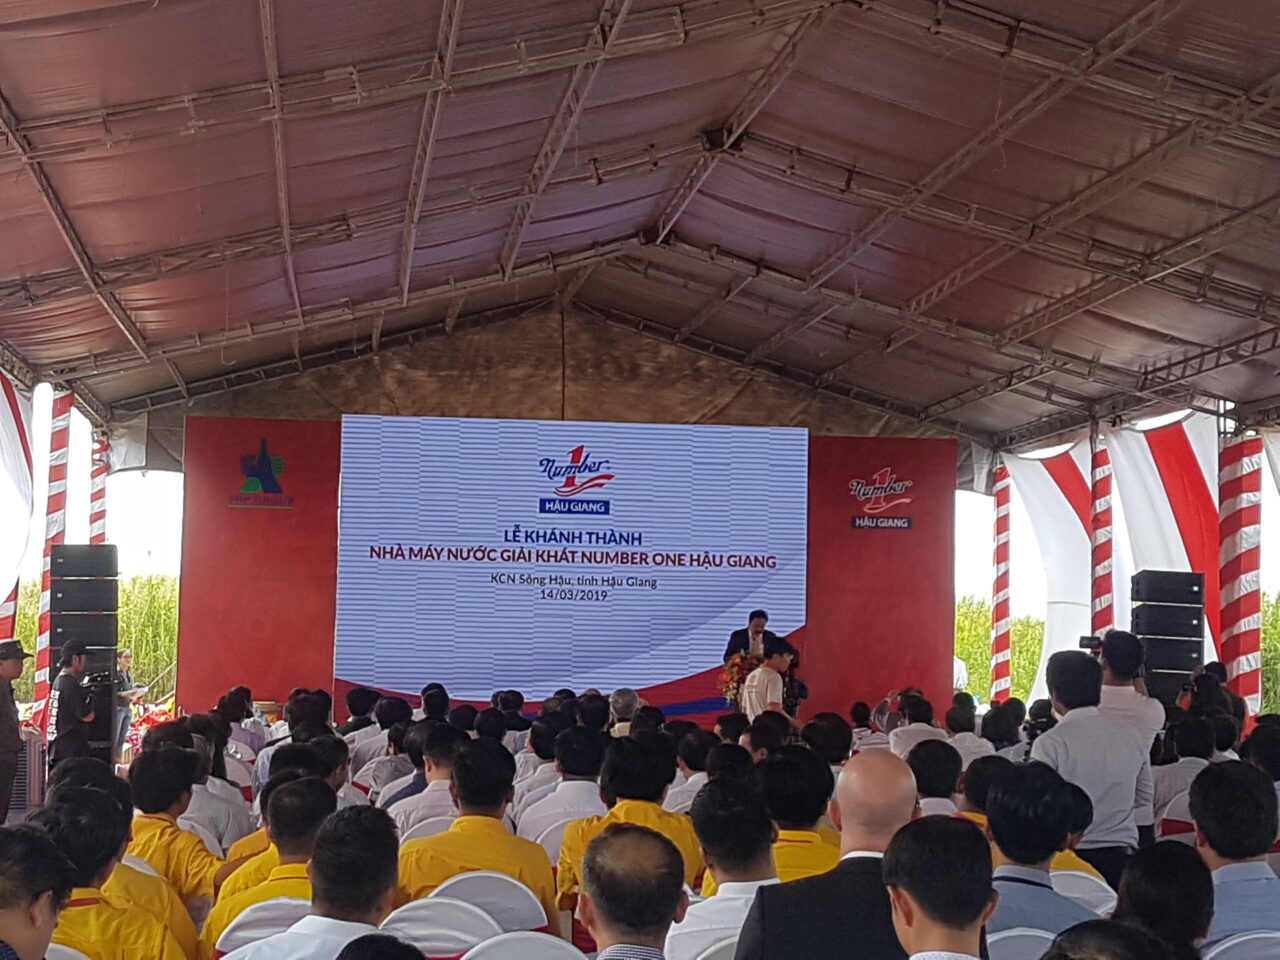 Inauguration of Number One Hau Giang Factory